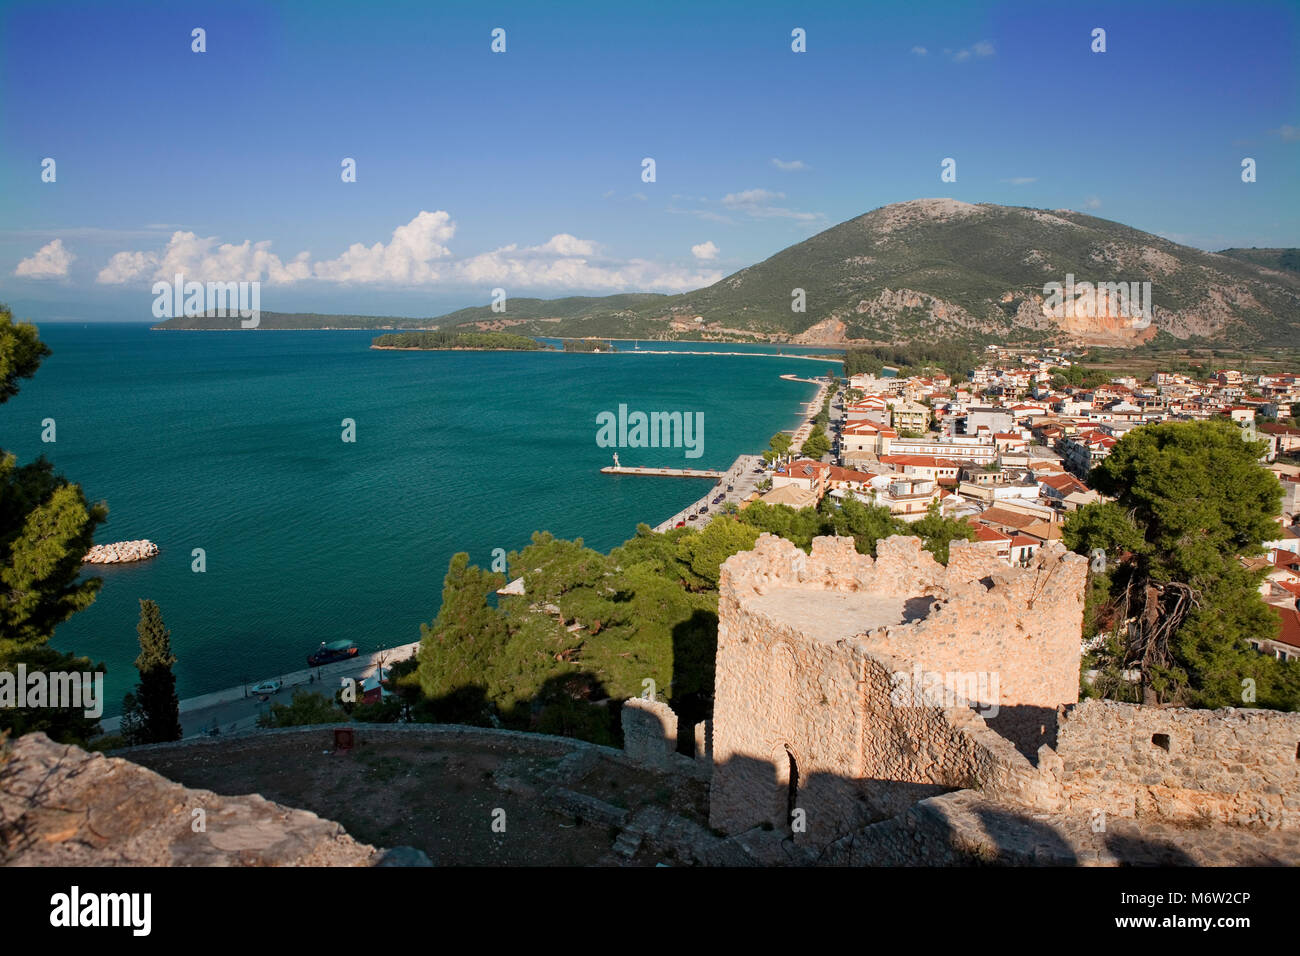 View from the Venetian fortress over Vonitsa, Ambracian Gulf, Greece Stock Photo